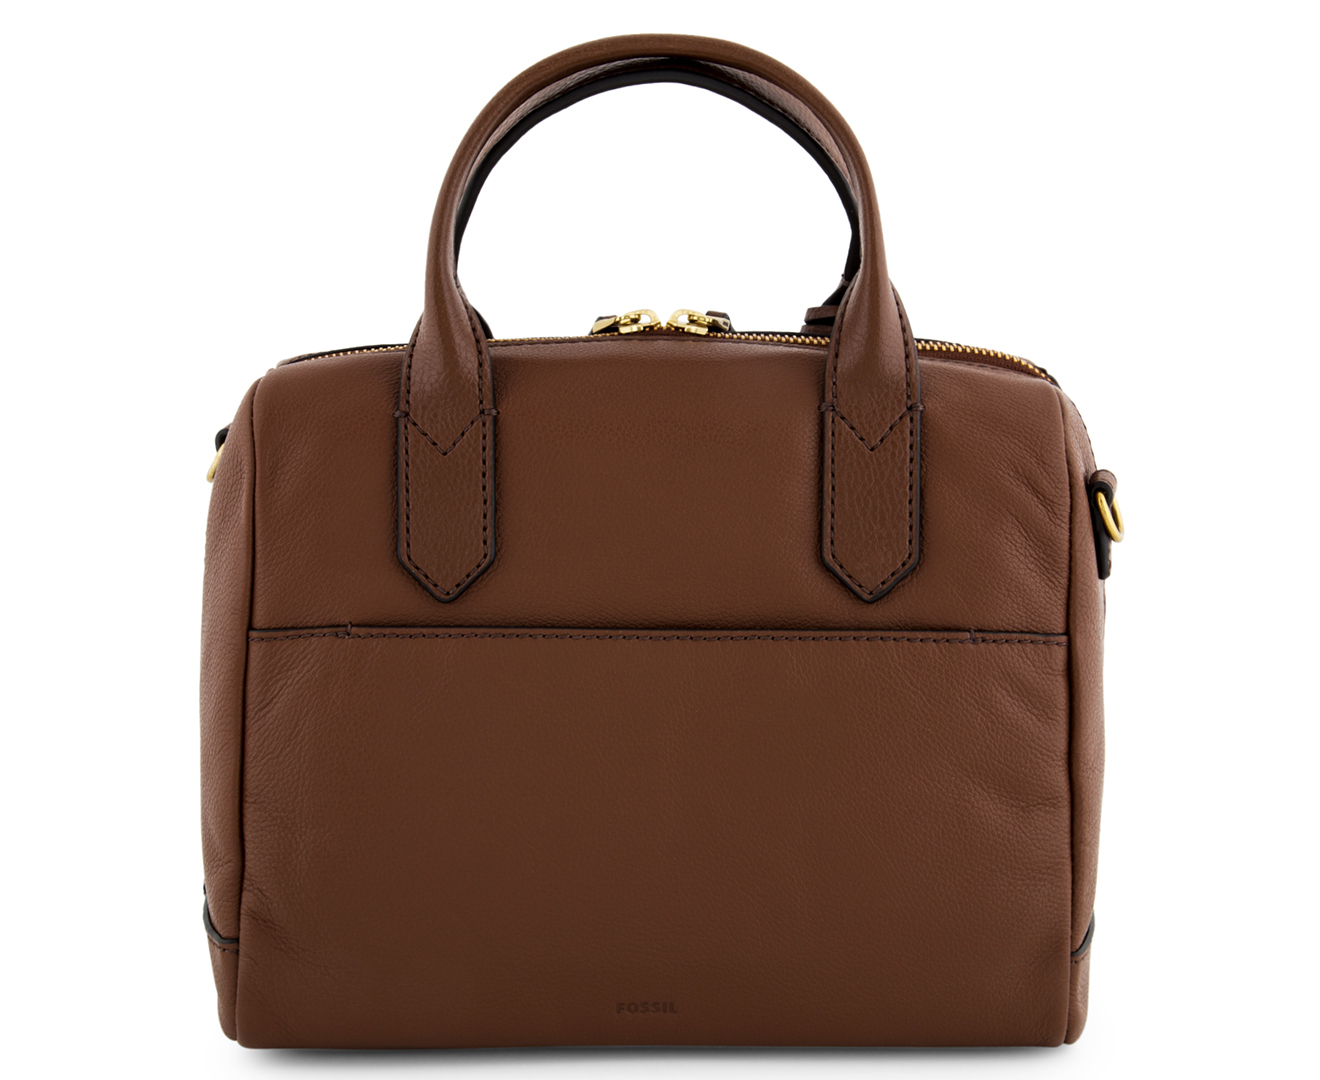 Fossil Fiona Satchel - Brown